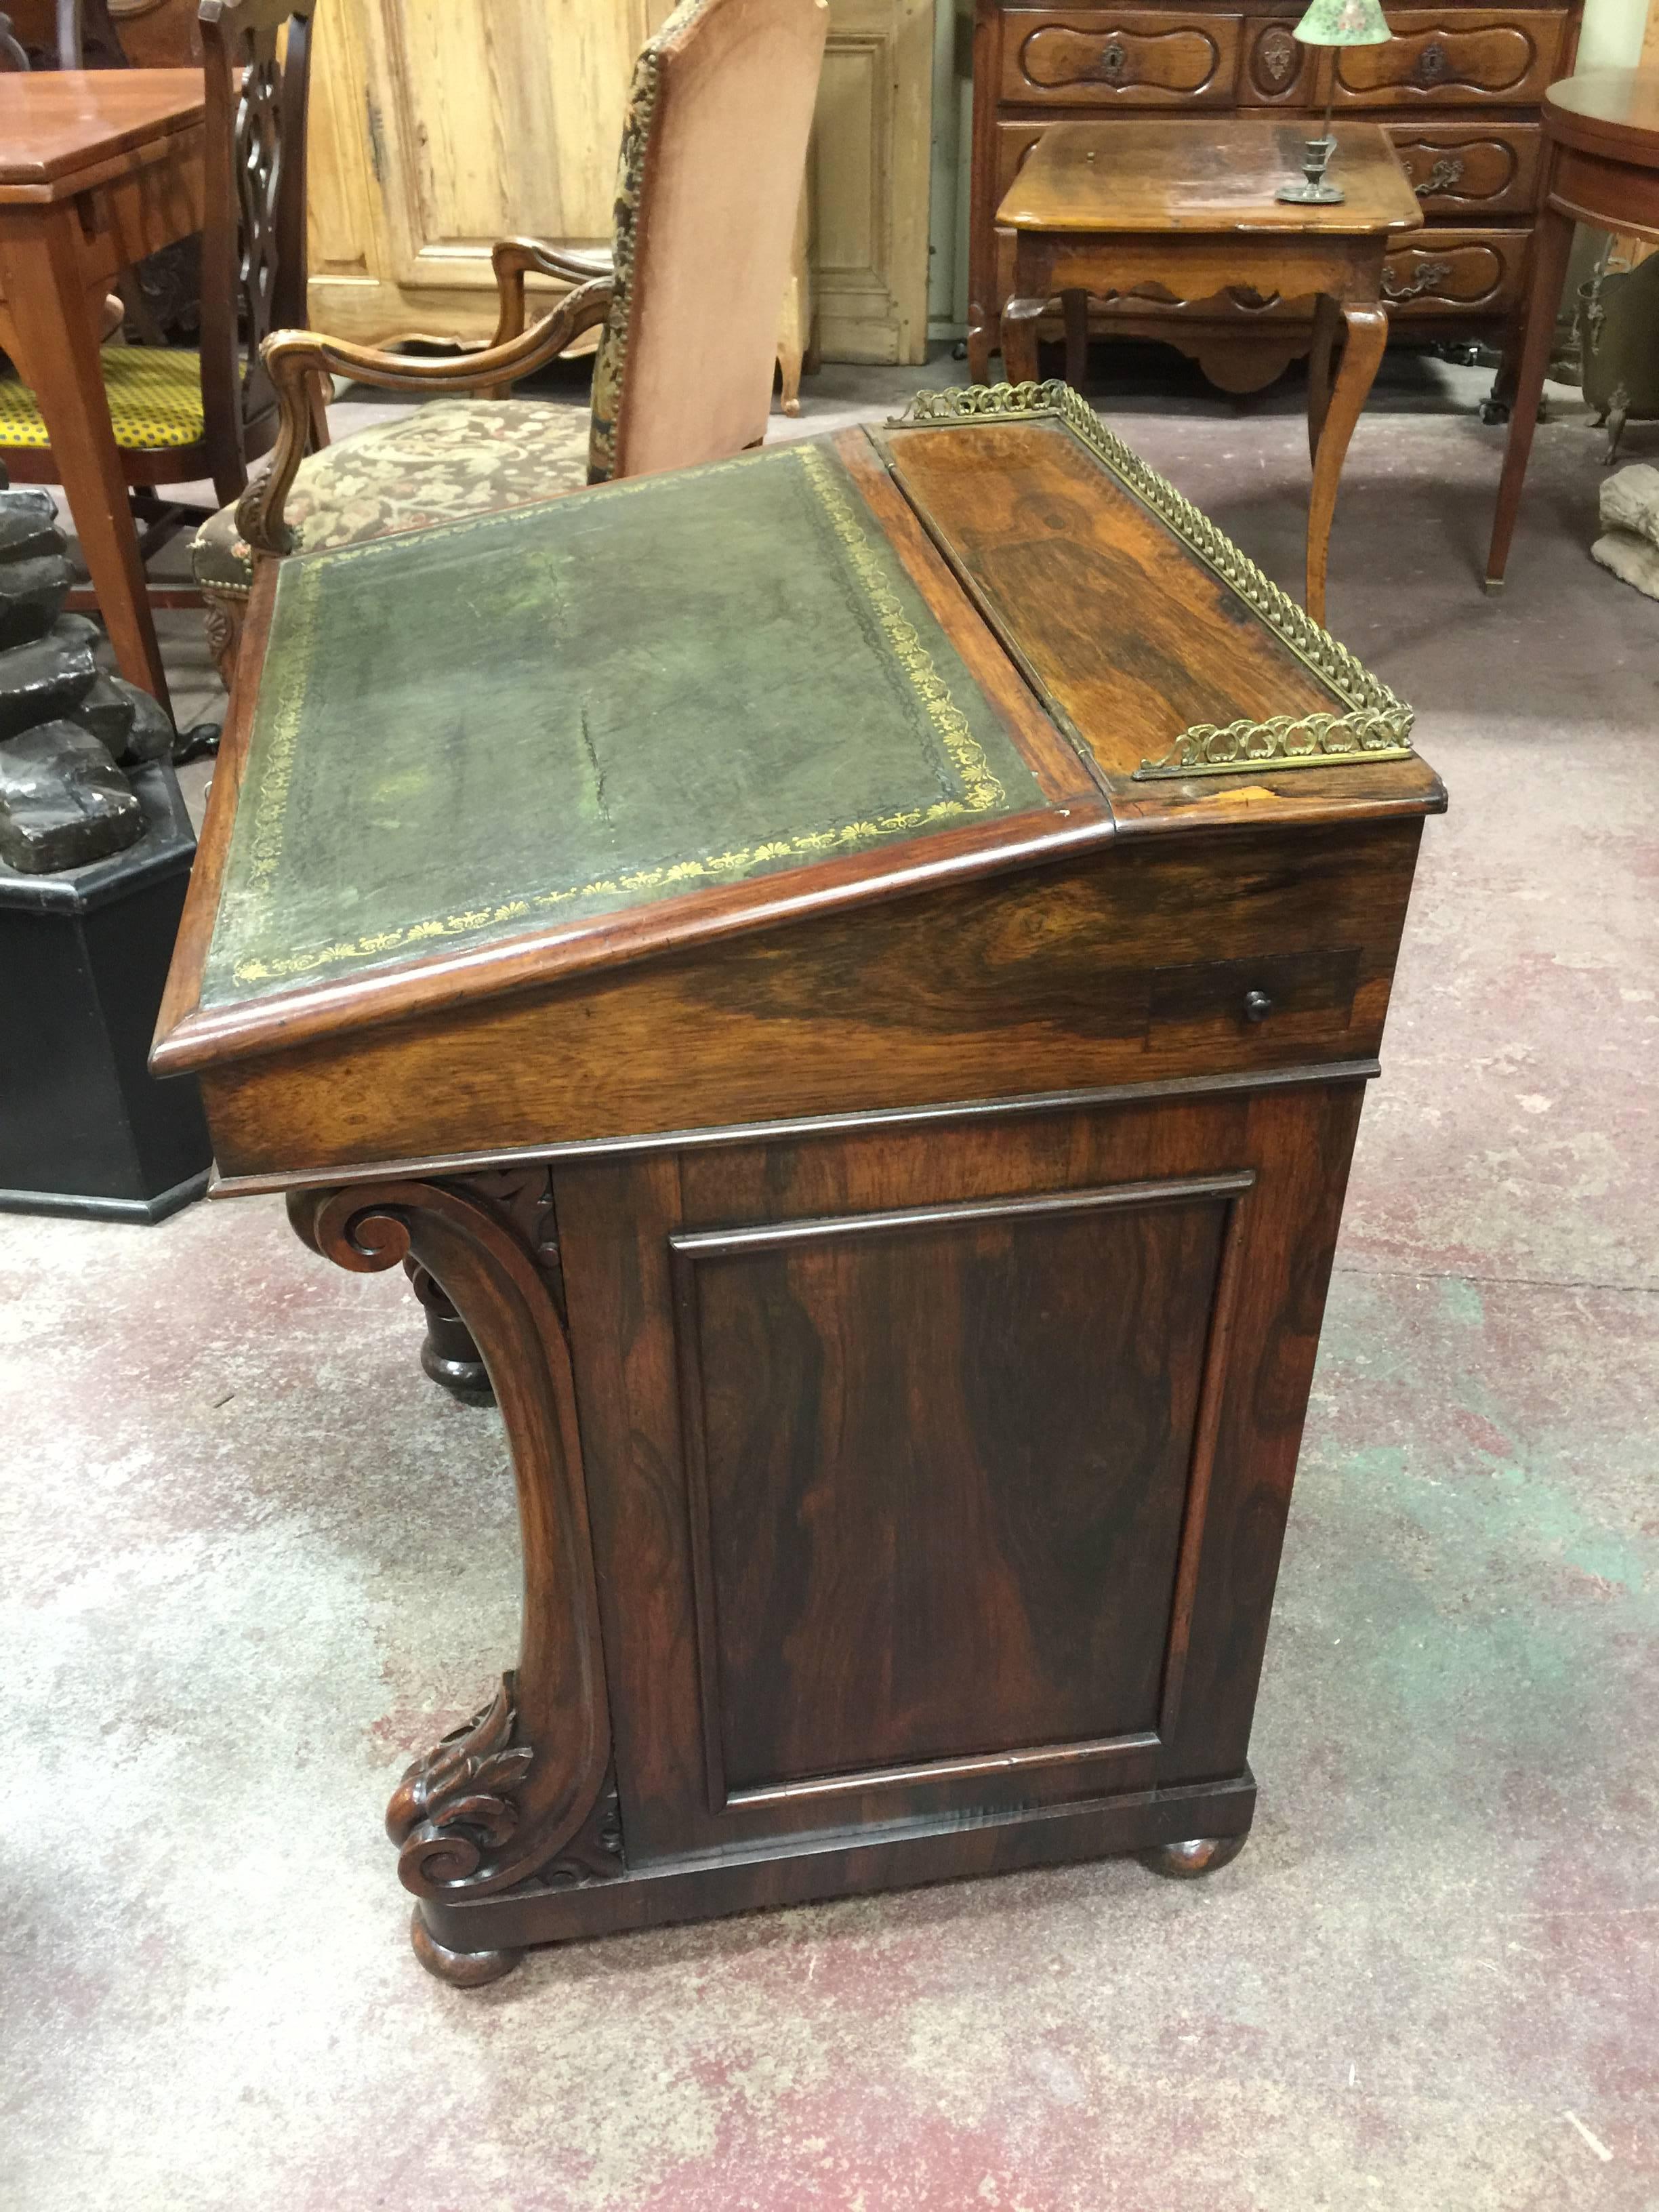 Mid-19th century Davenport desk with original leather top.
Brass gallery . 